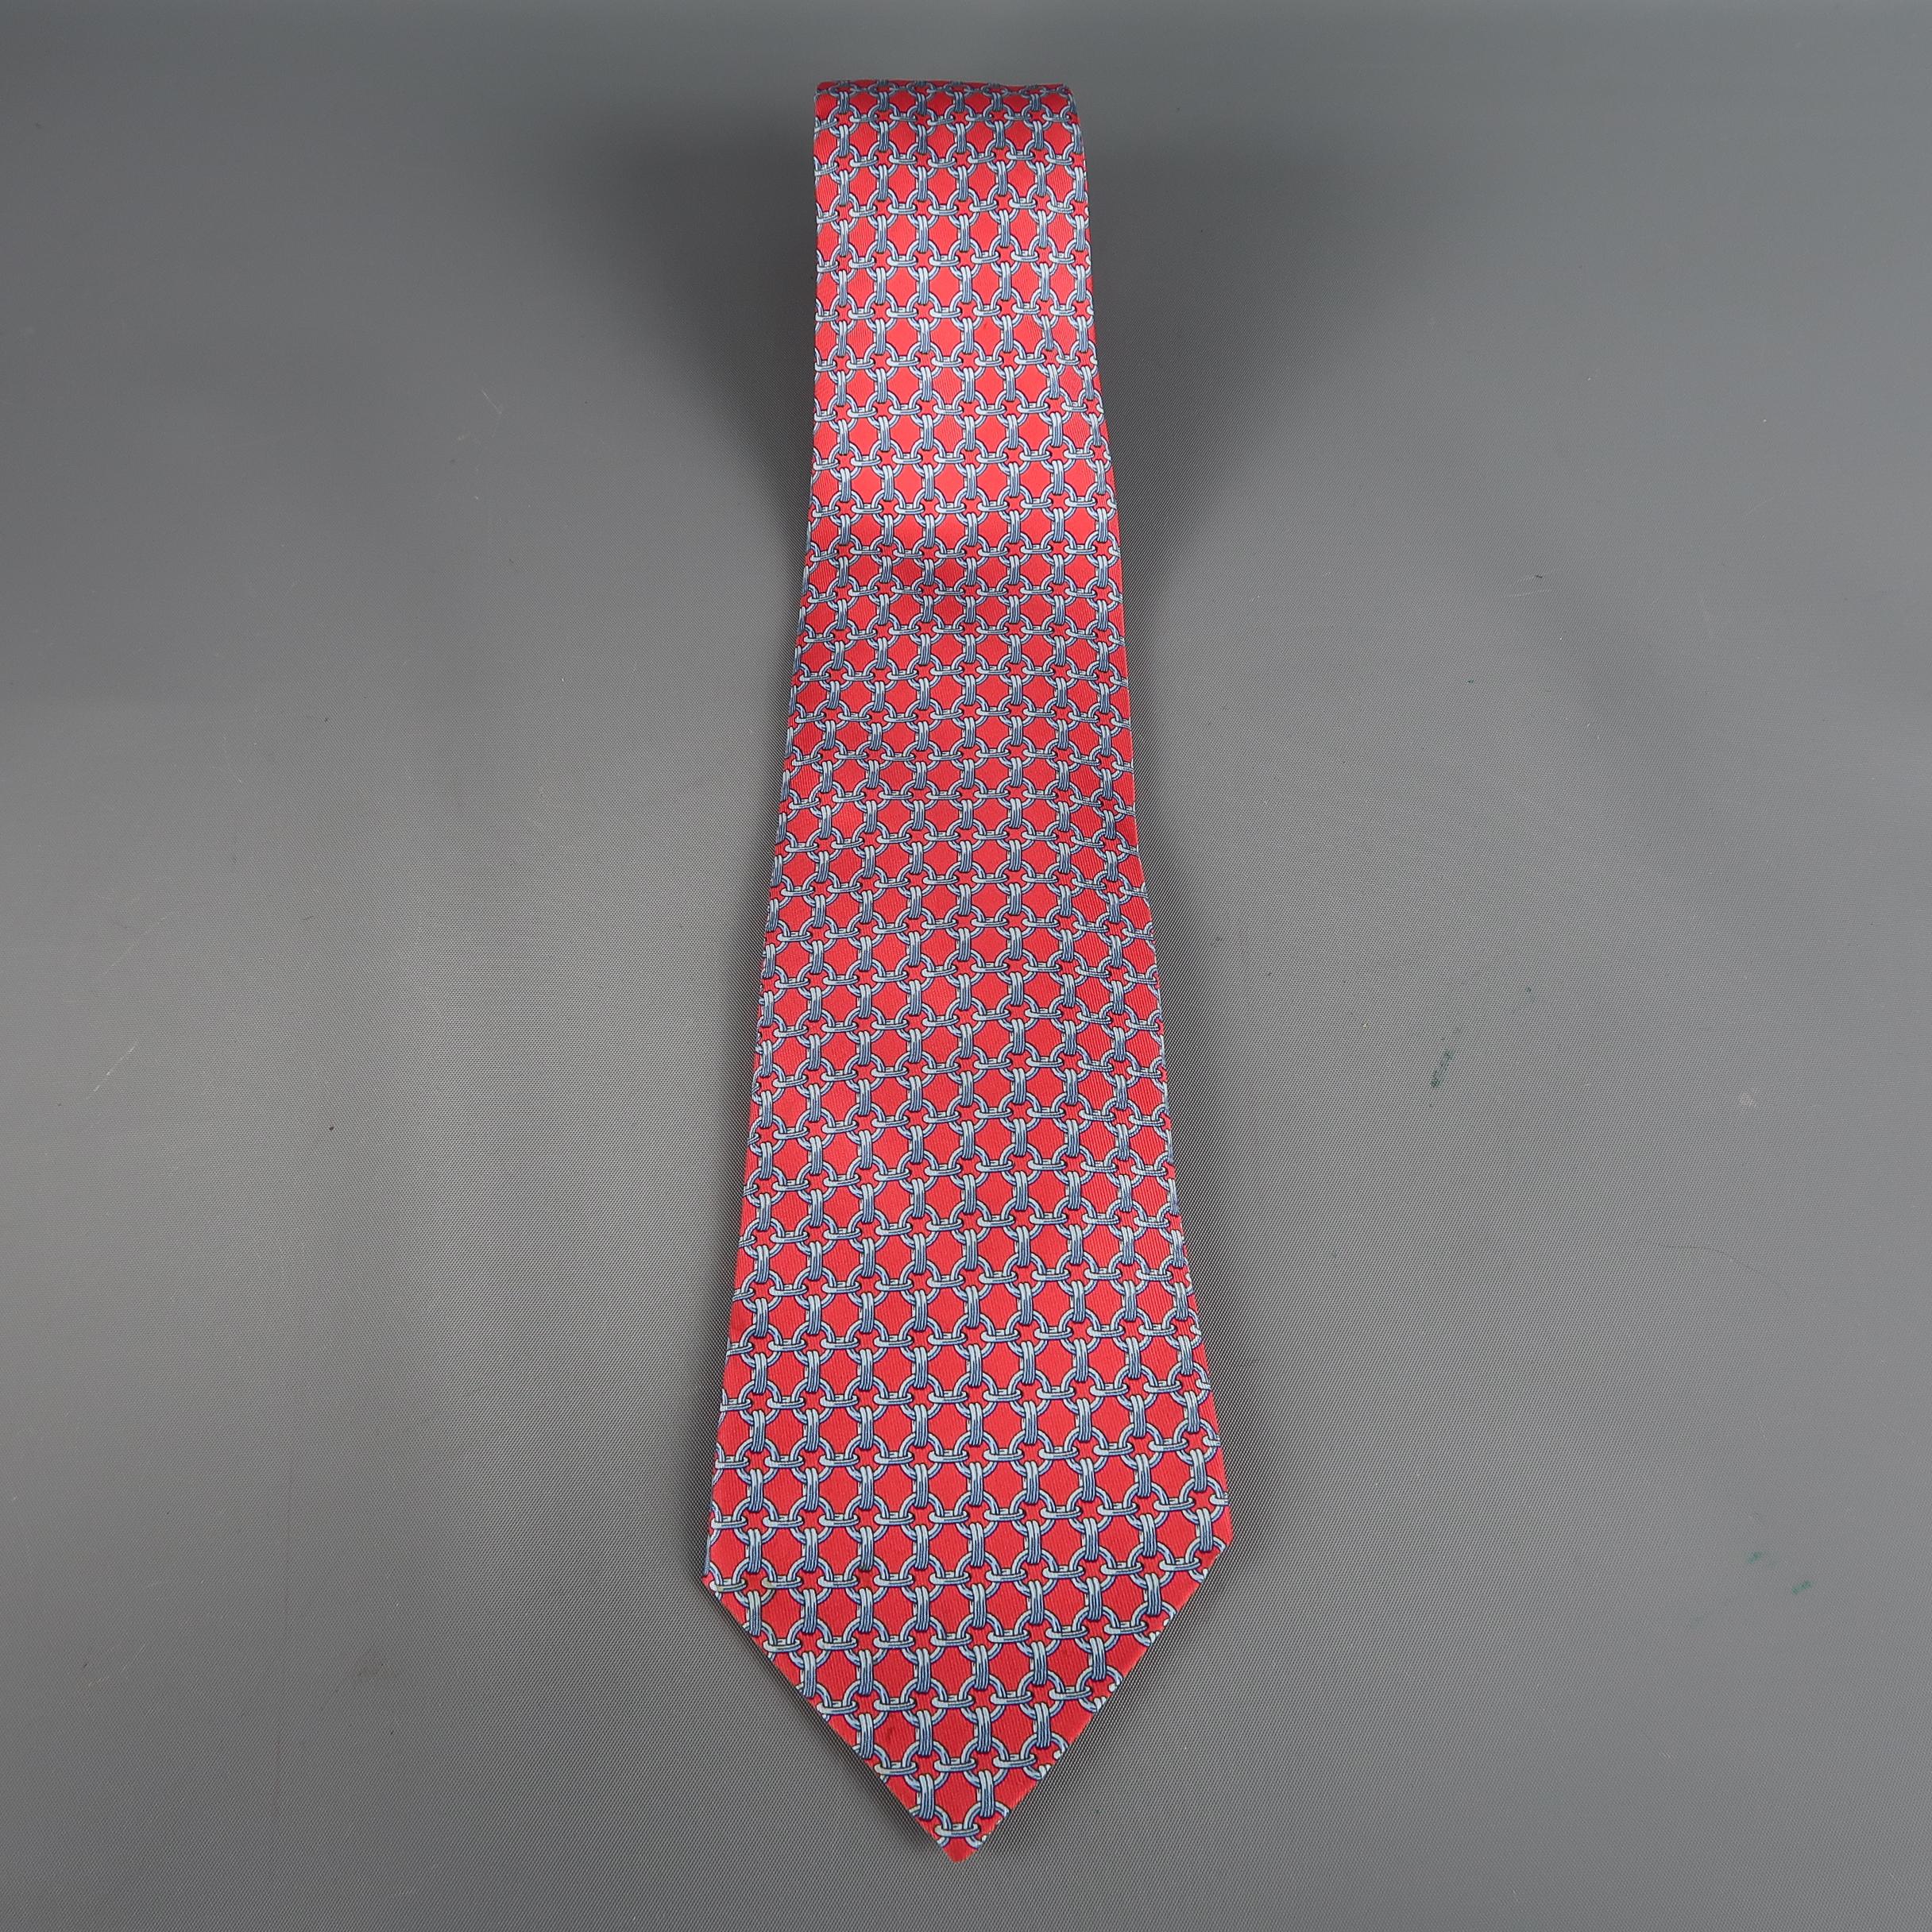 HERMES tie come in red and blue silk  with an all over chain print. Made in France.
 
Excellent Pre-Owned Condition.
 
Width: 3.5 in.